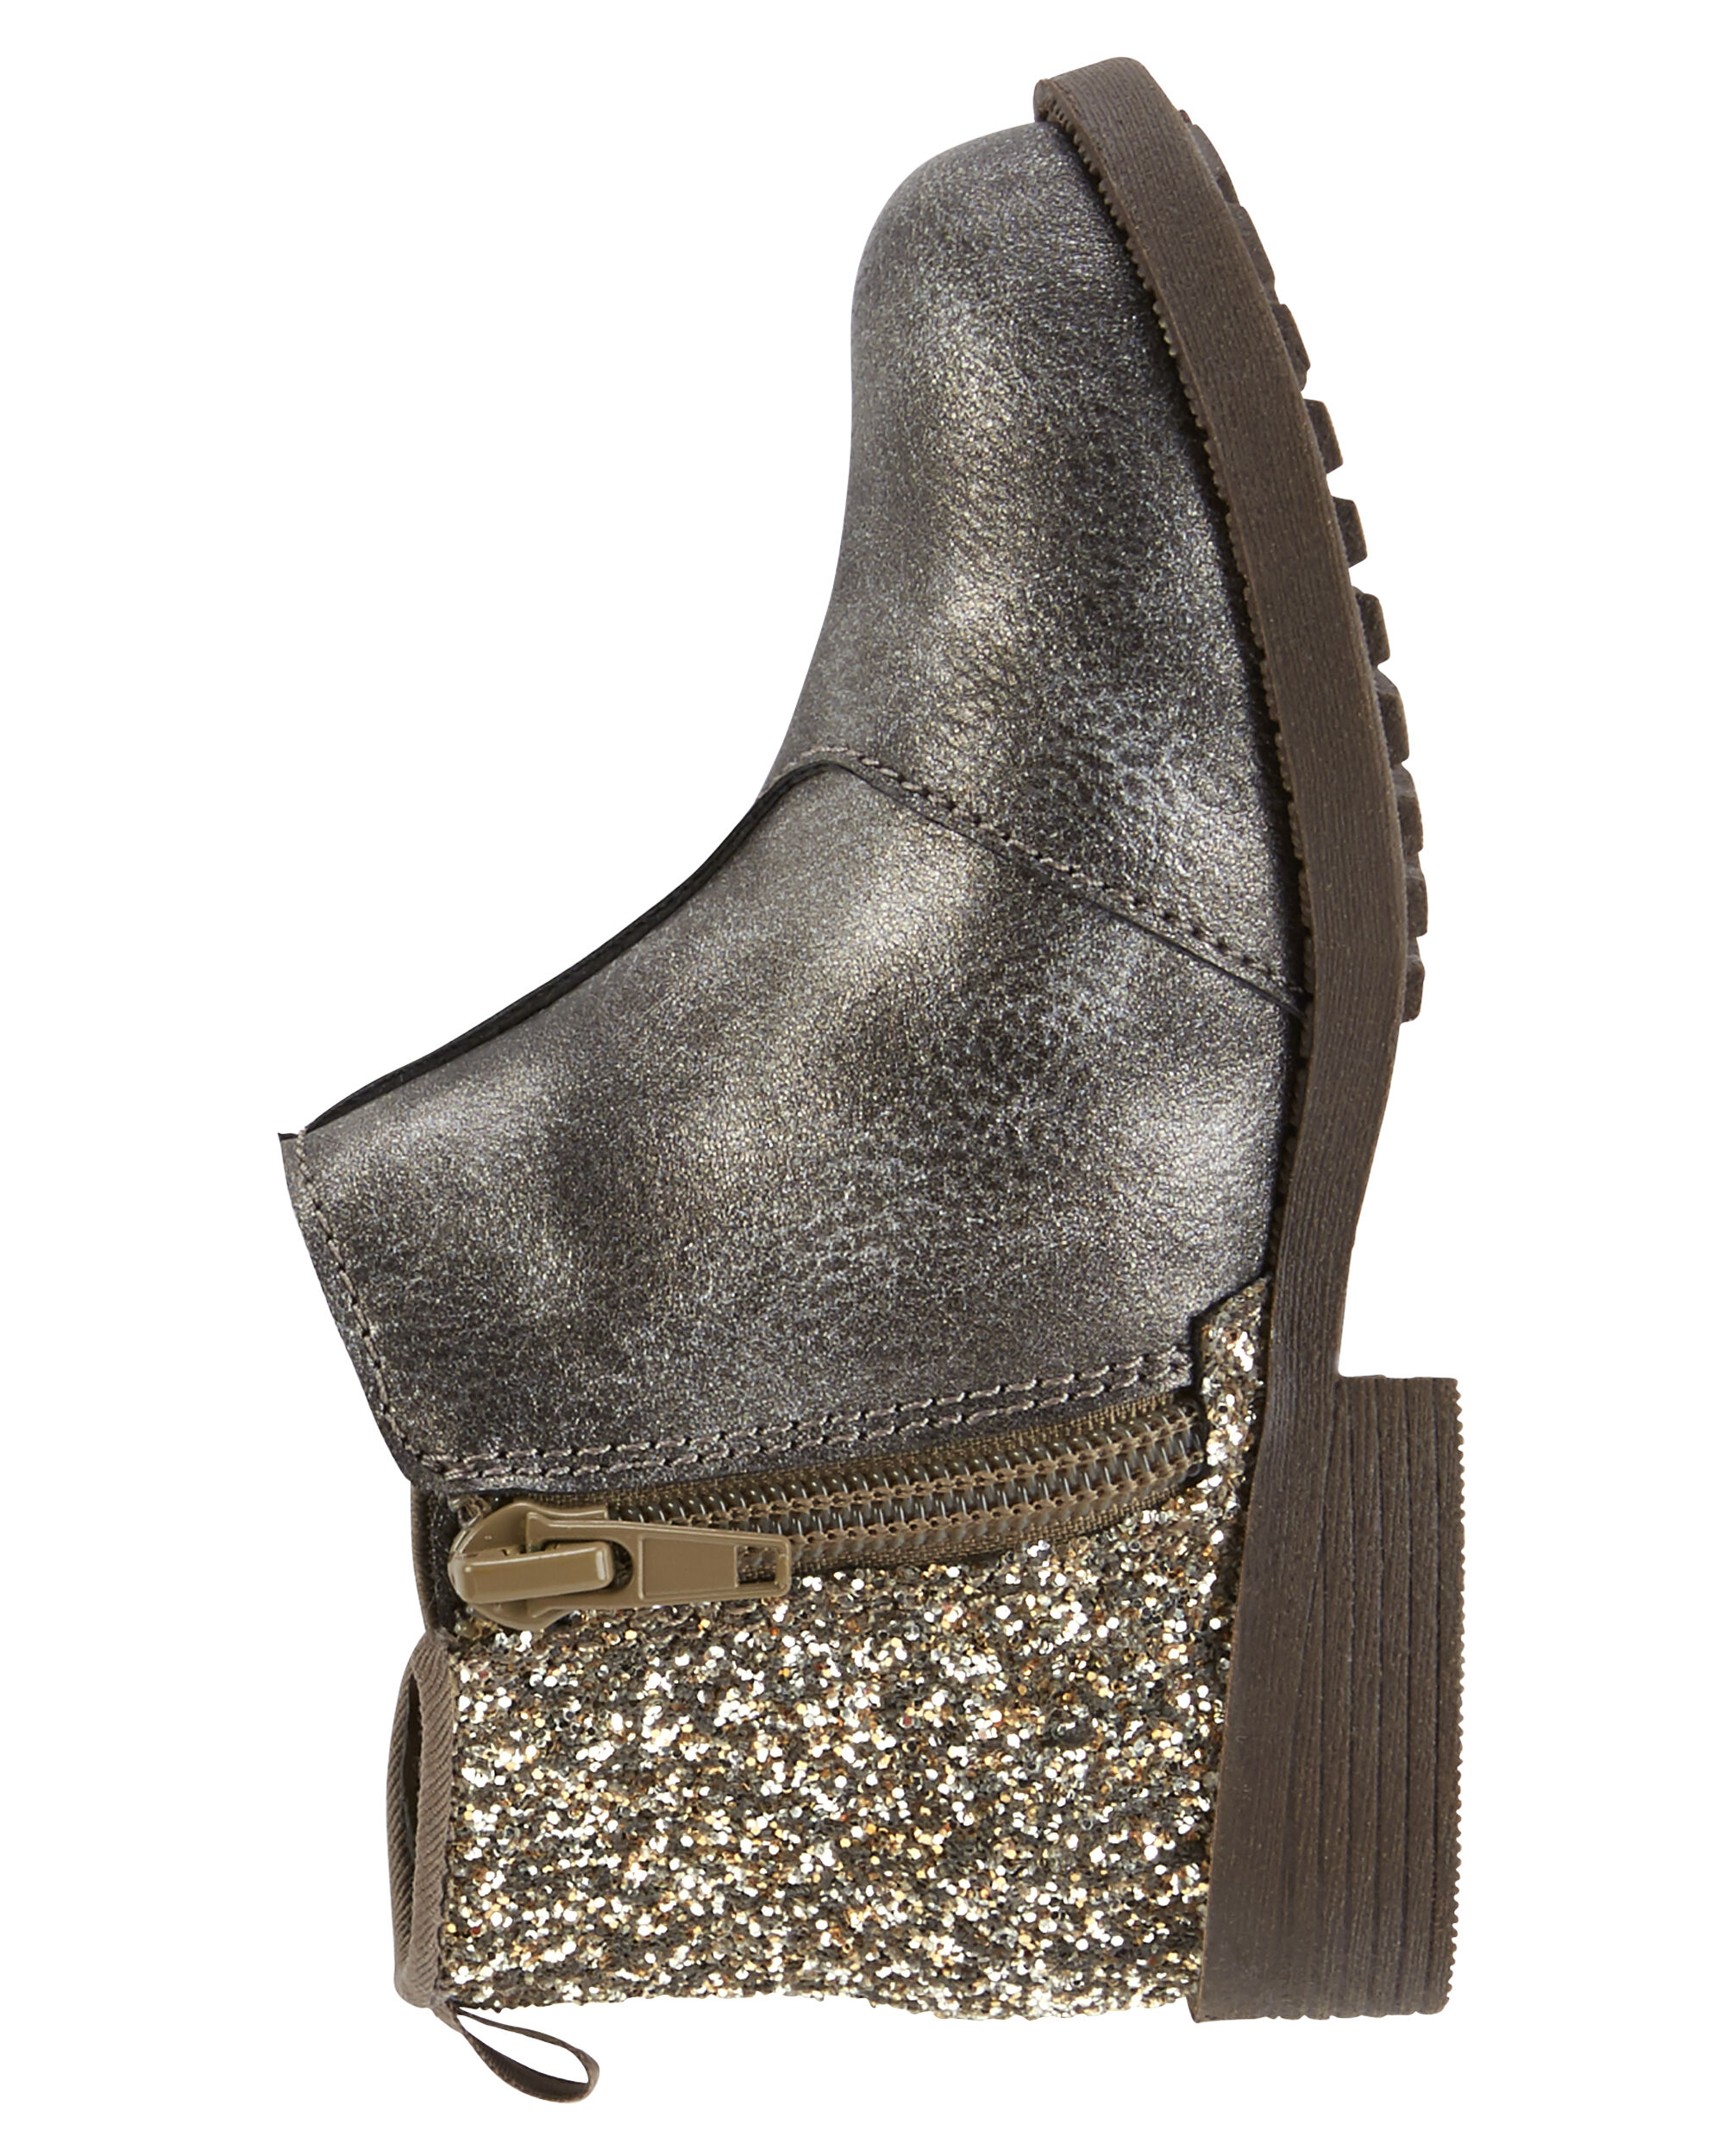 silver sparkle booties